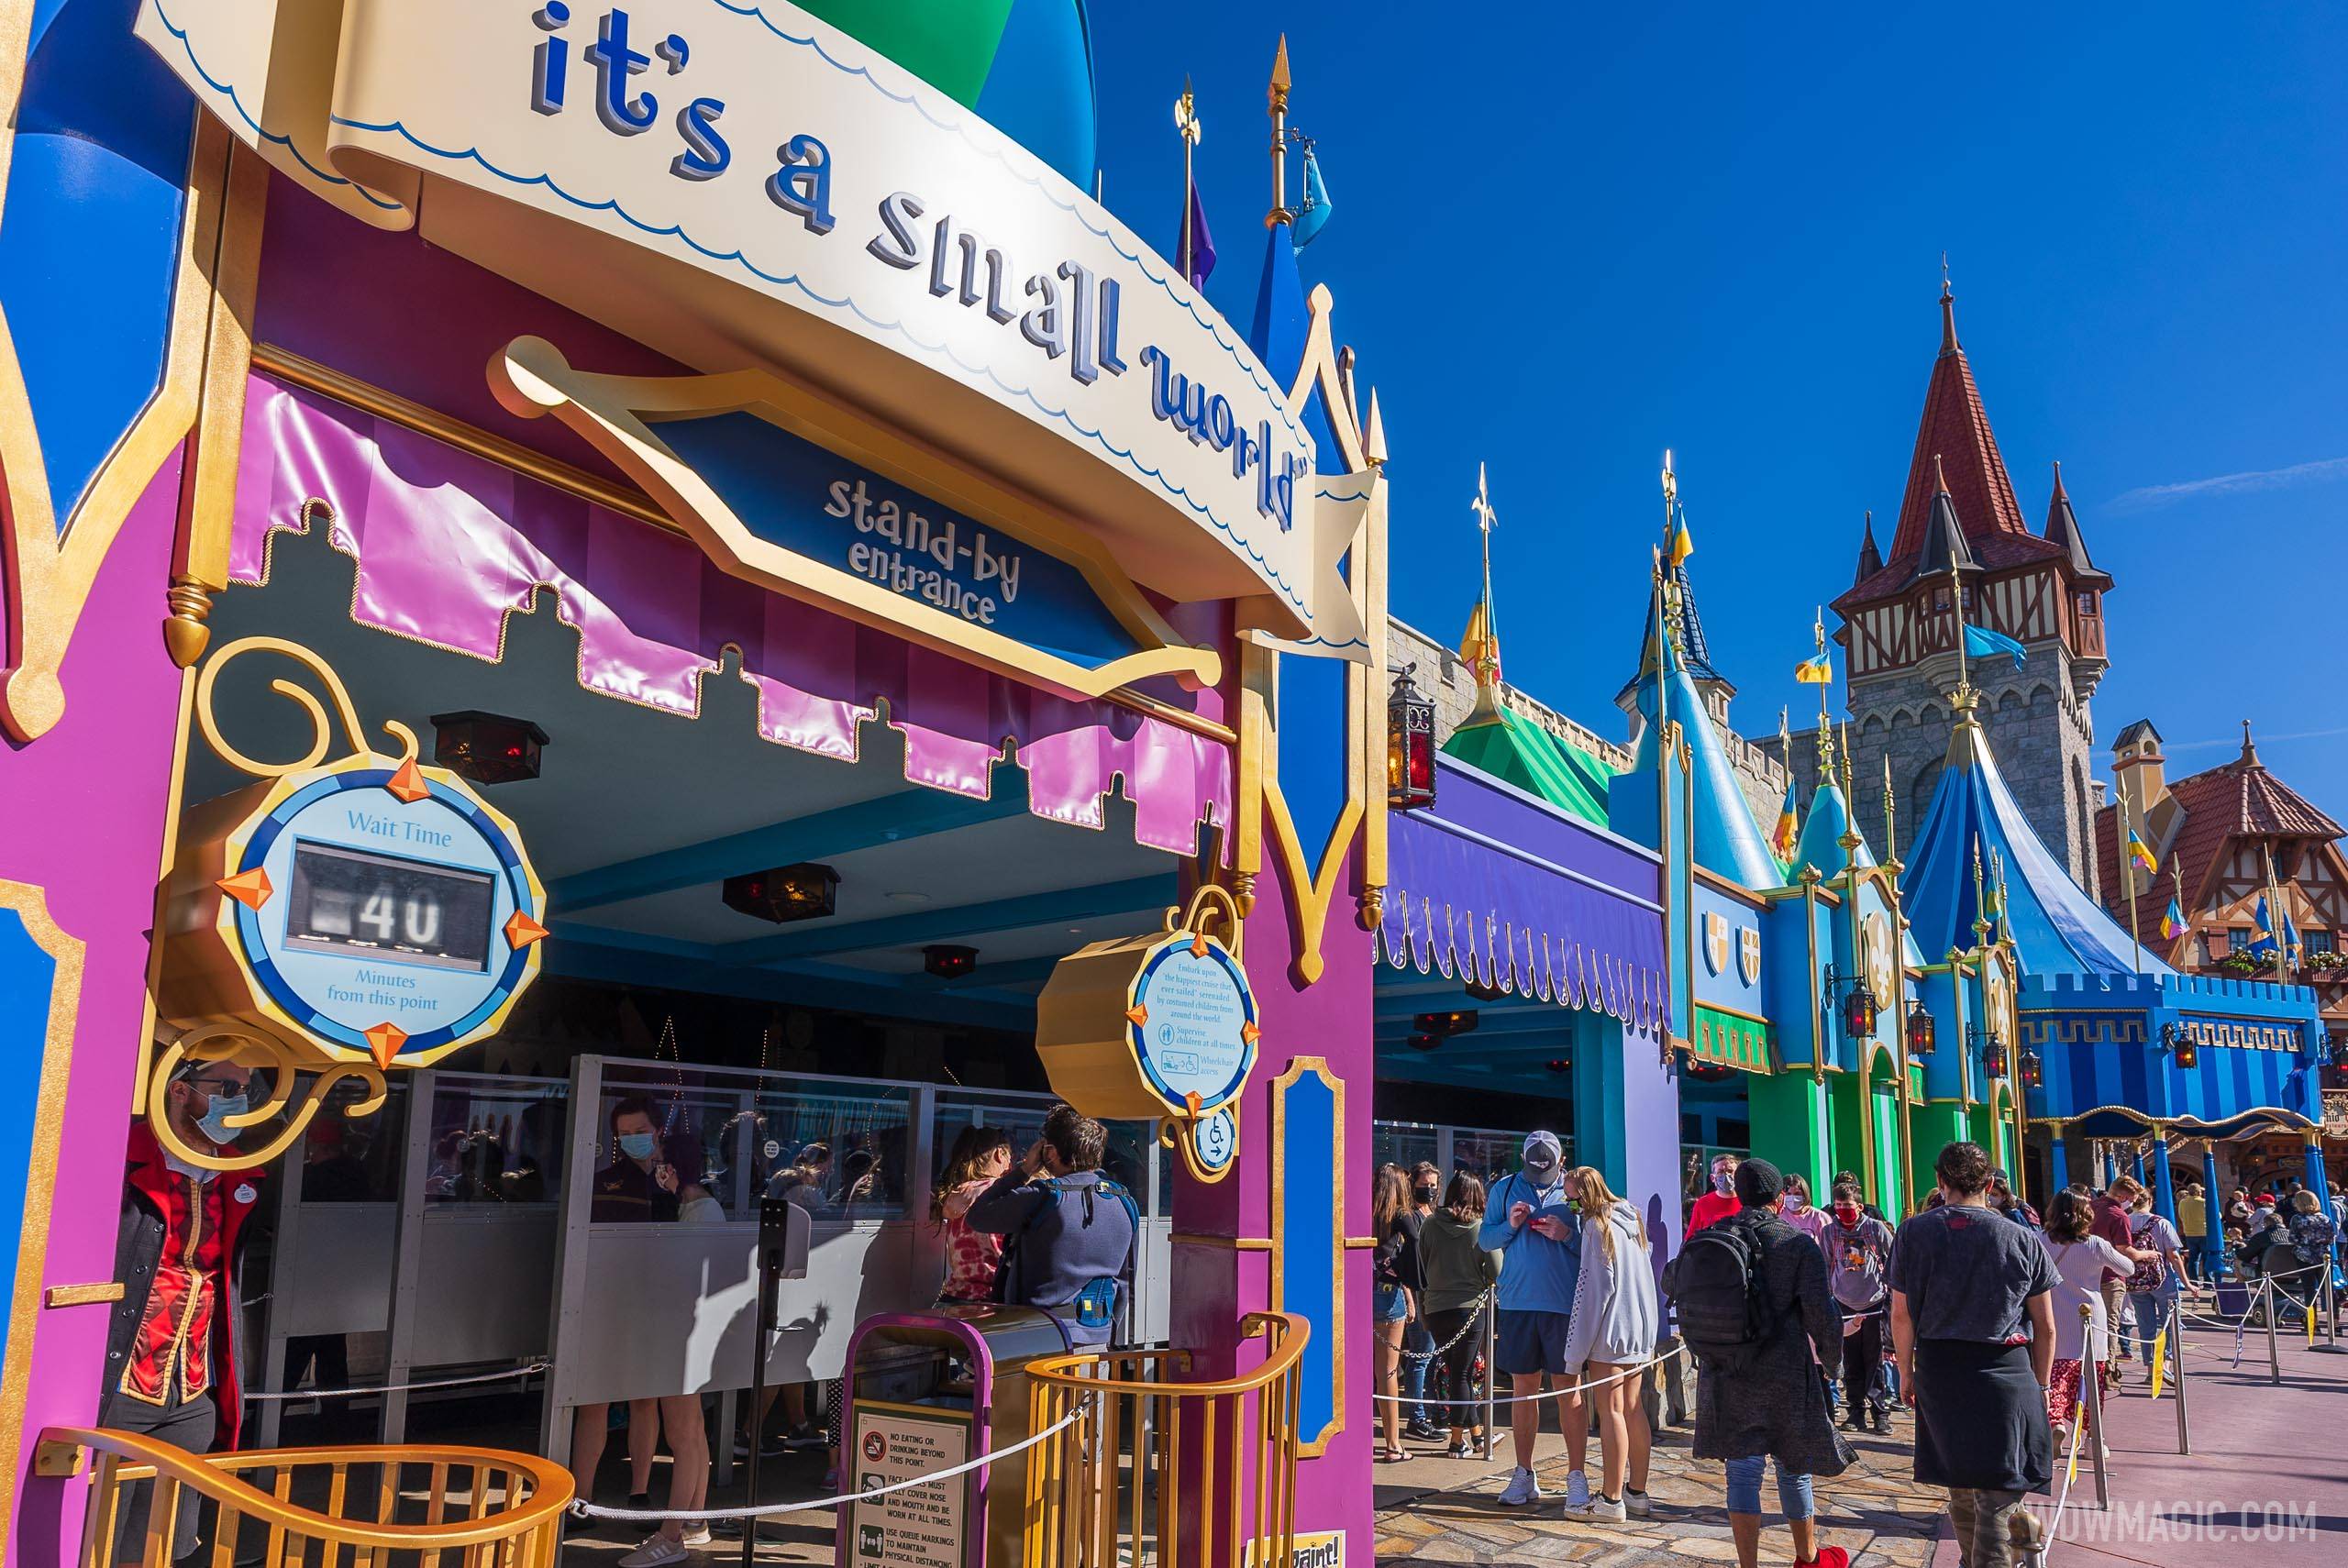 it's a small world exterior refurbishment completed - January 2021